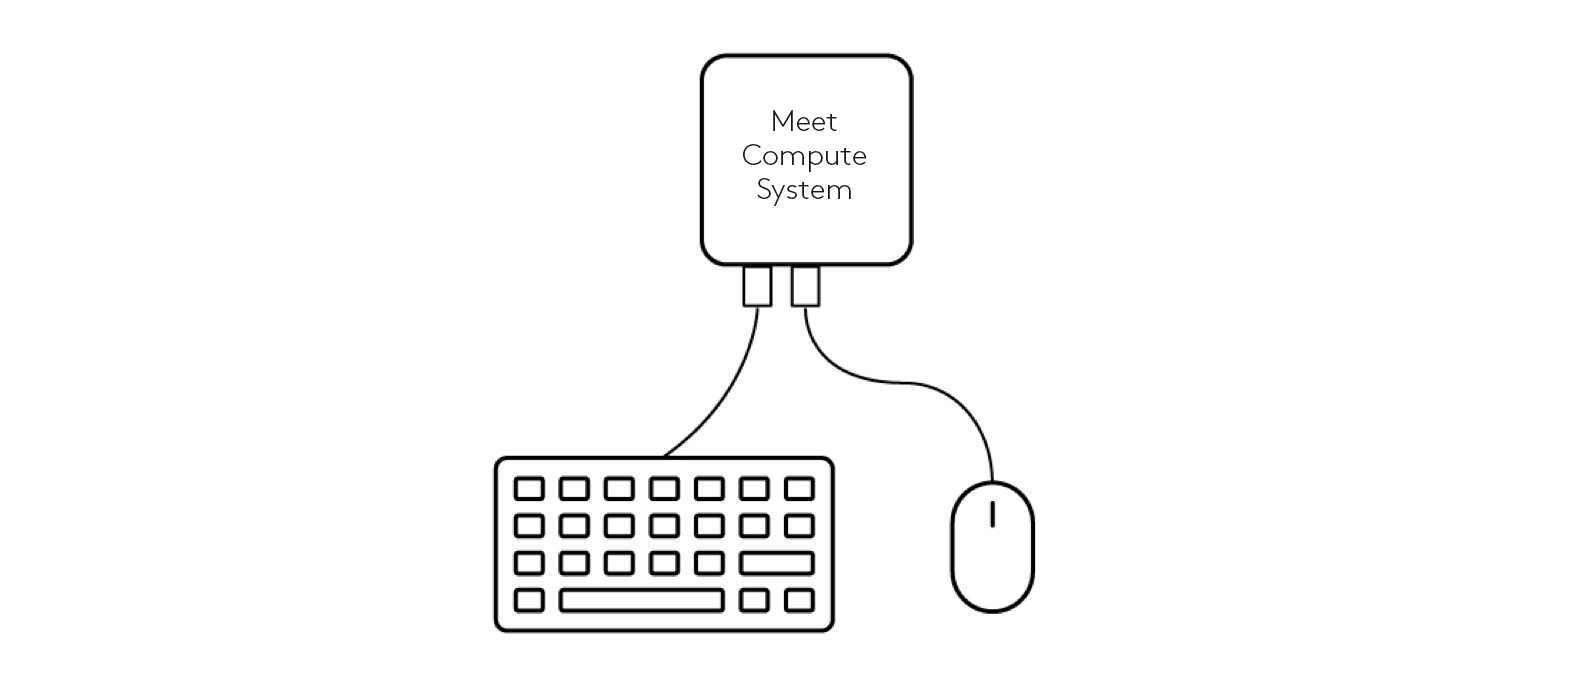 Diagram of connecting keyboard and mouse to Meet Compute System